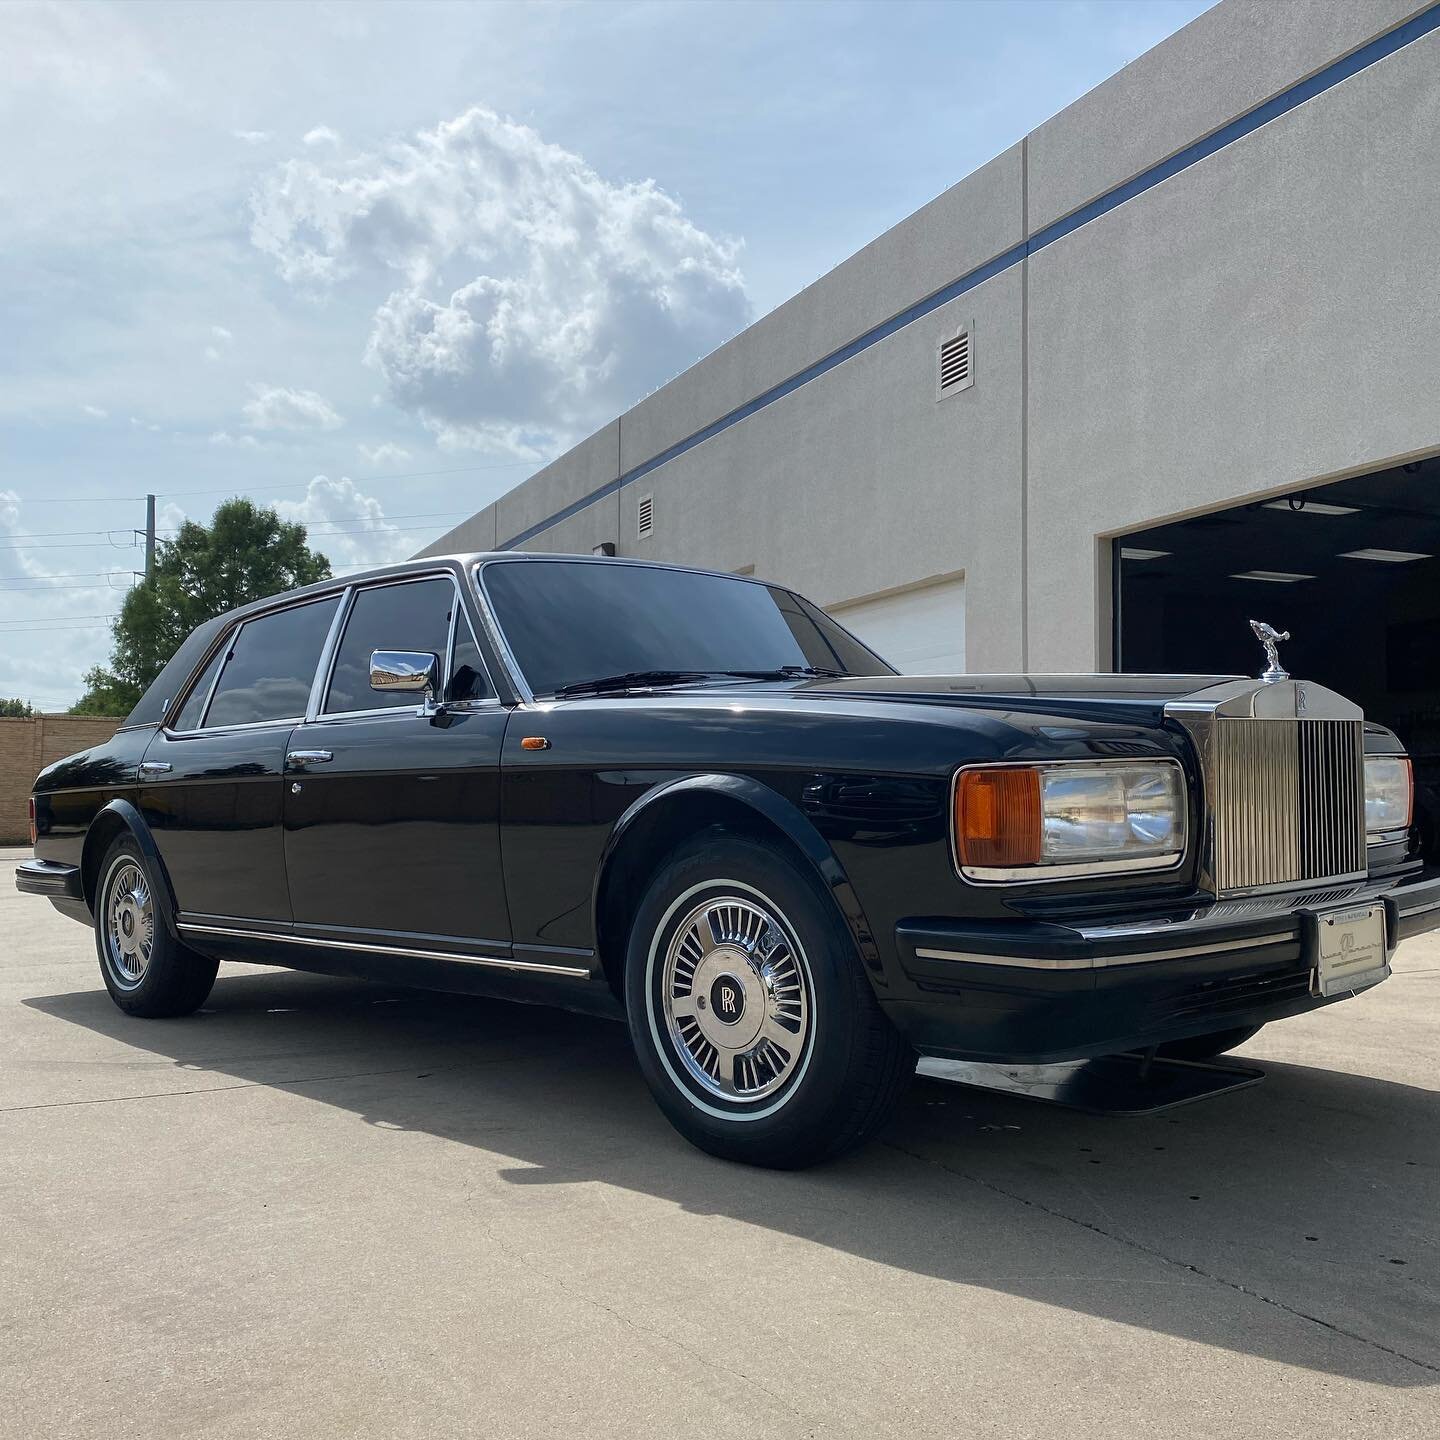 Have you ever cleaned &amp; polished Sadam Hussein&rsquo;s Rolls Royce Silver Spur? Well, me neither, but it looks like a car he would own. Paint, metal &amp; trim was restored. 

#drivephilthy